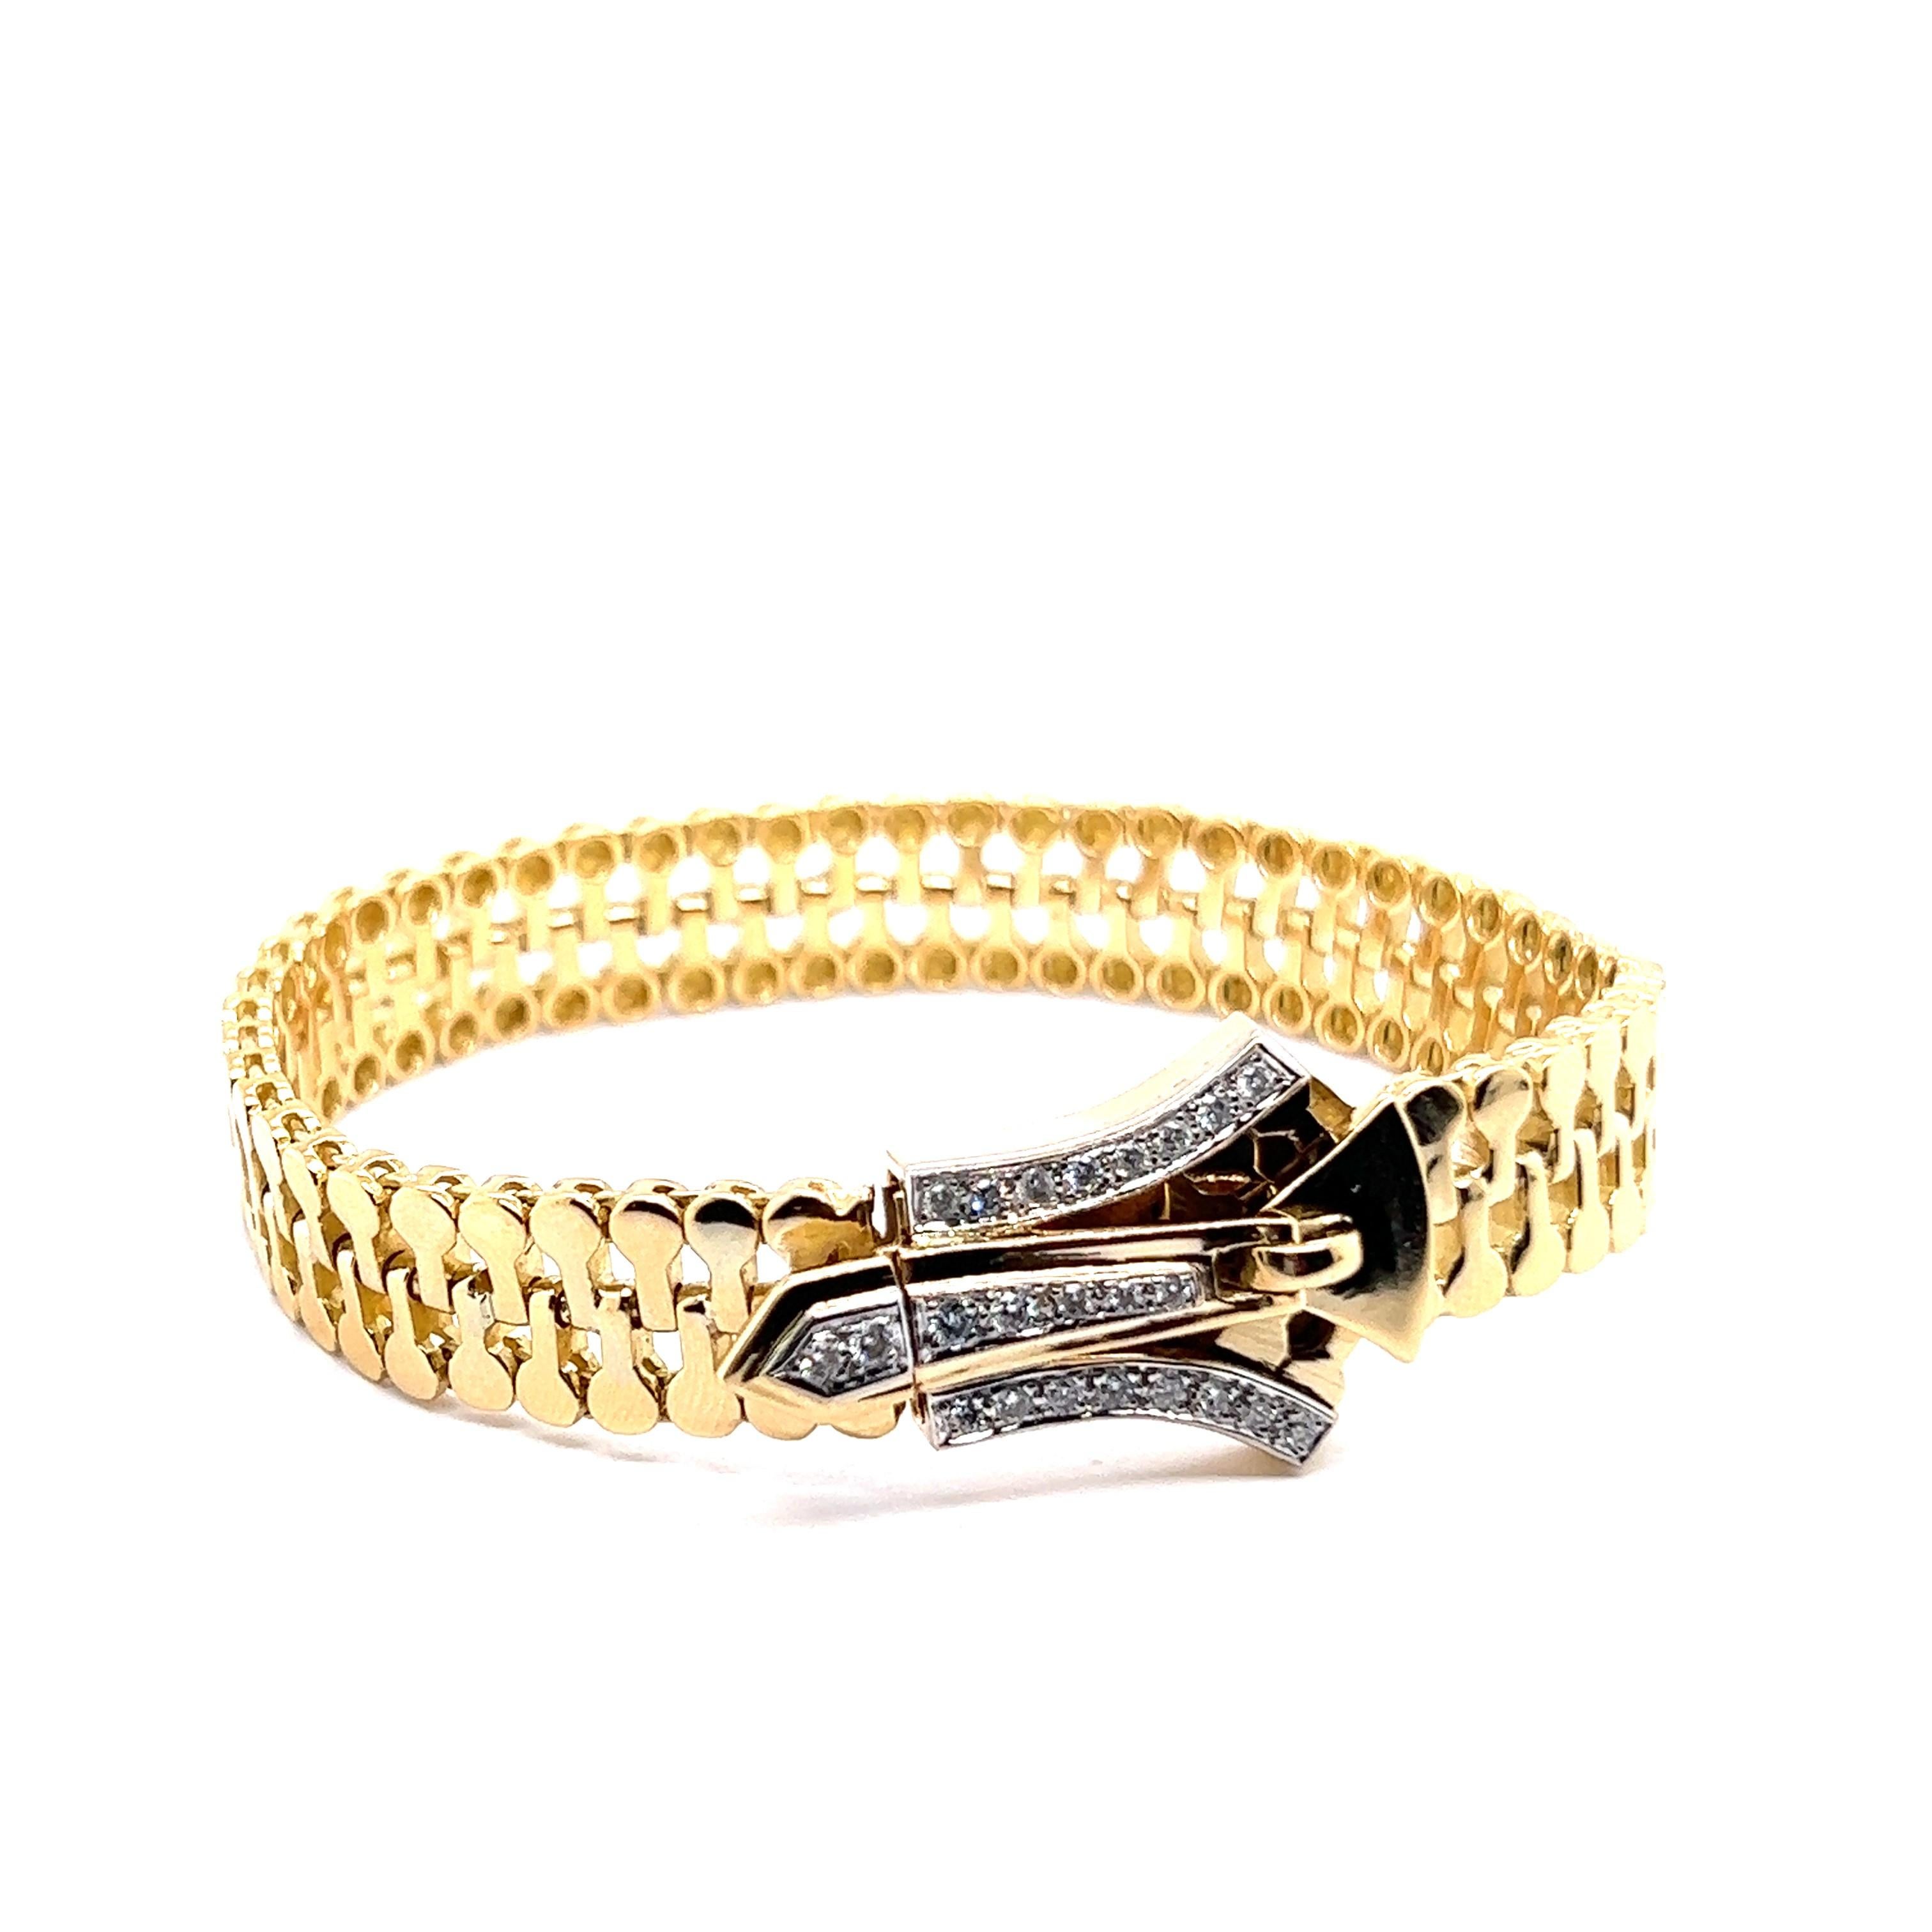 Zipper Bracelet with Diamonds in 18 Karat Yellow and White Gold For Sale 2